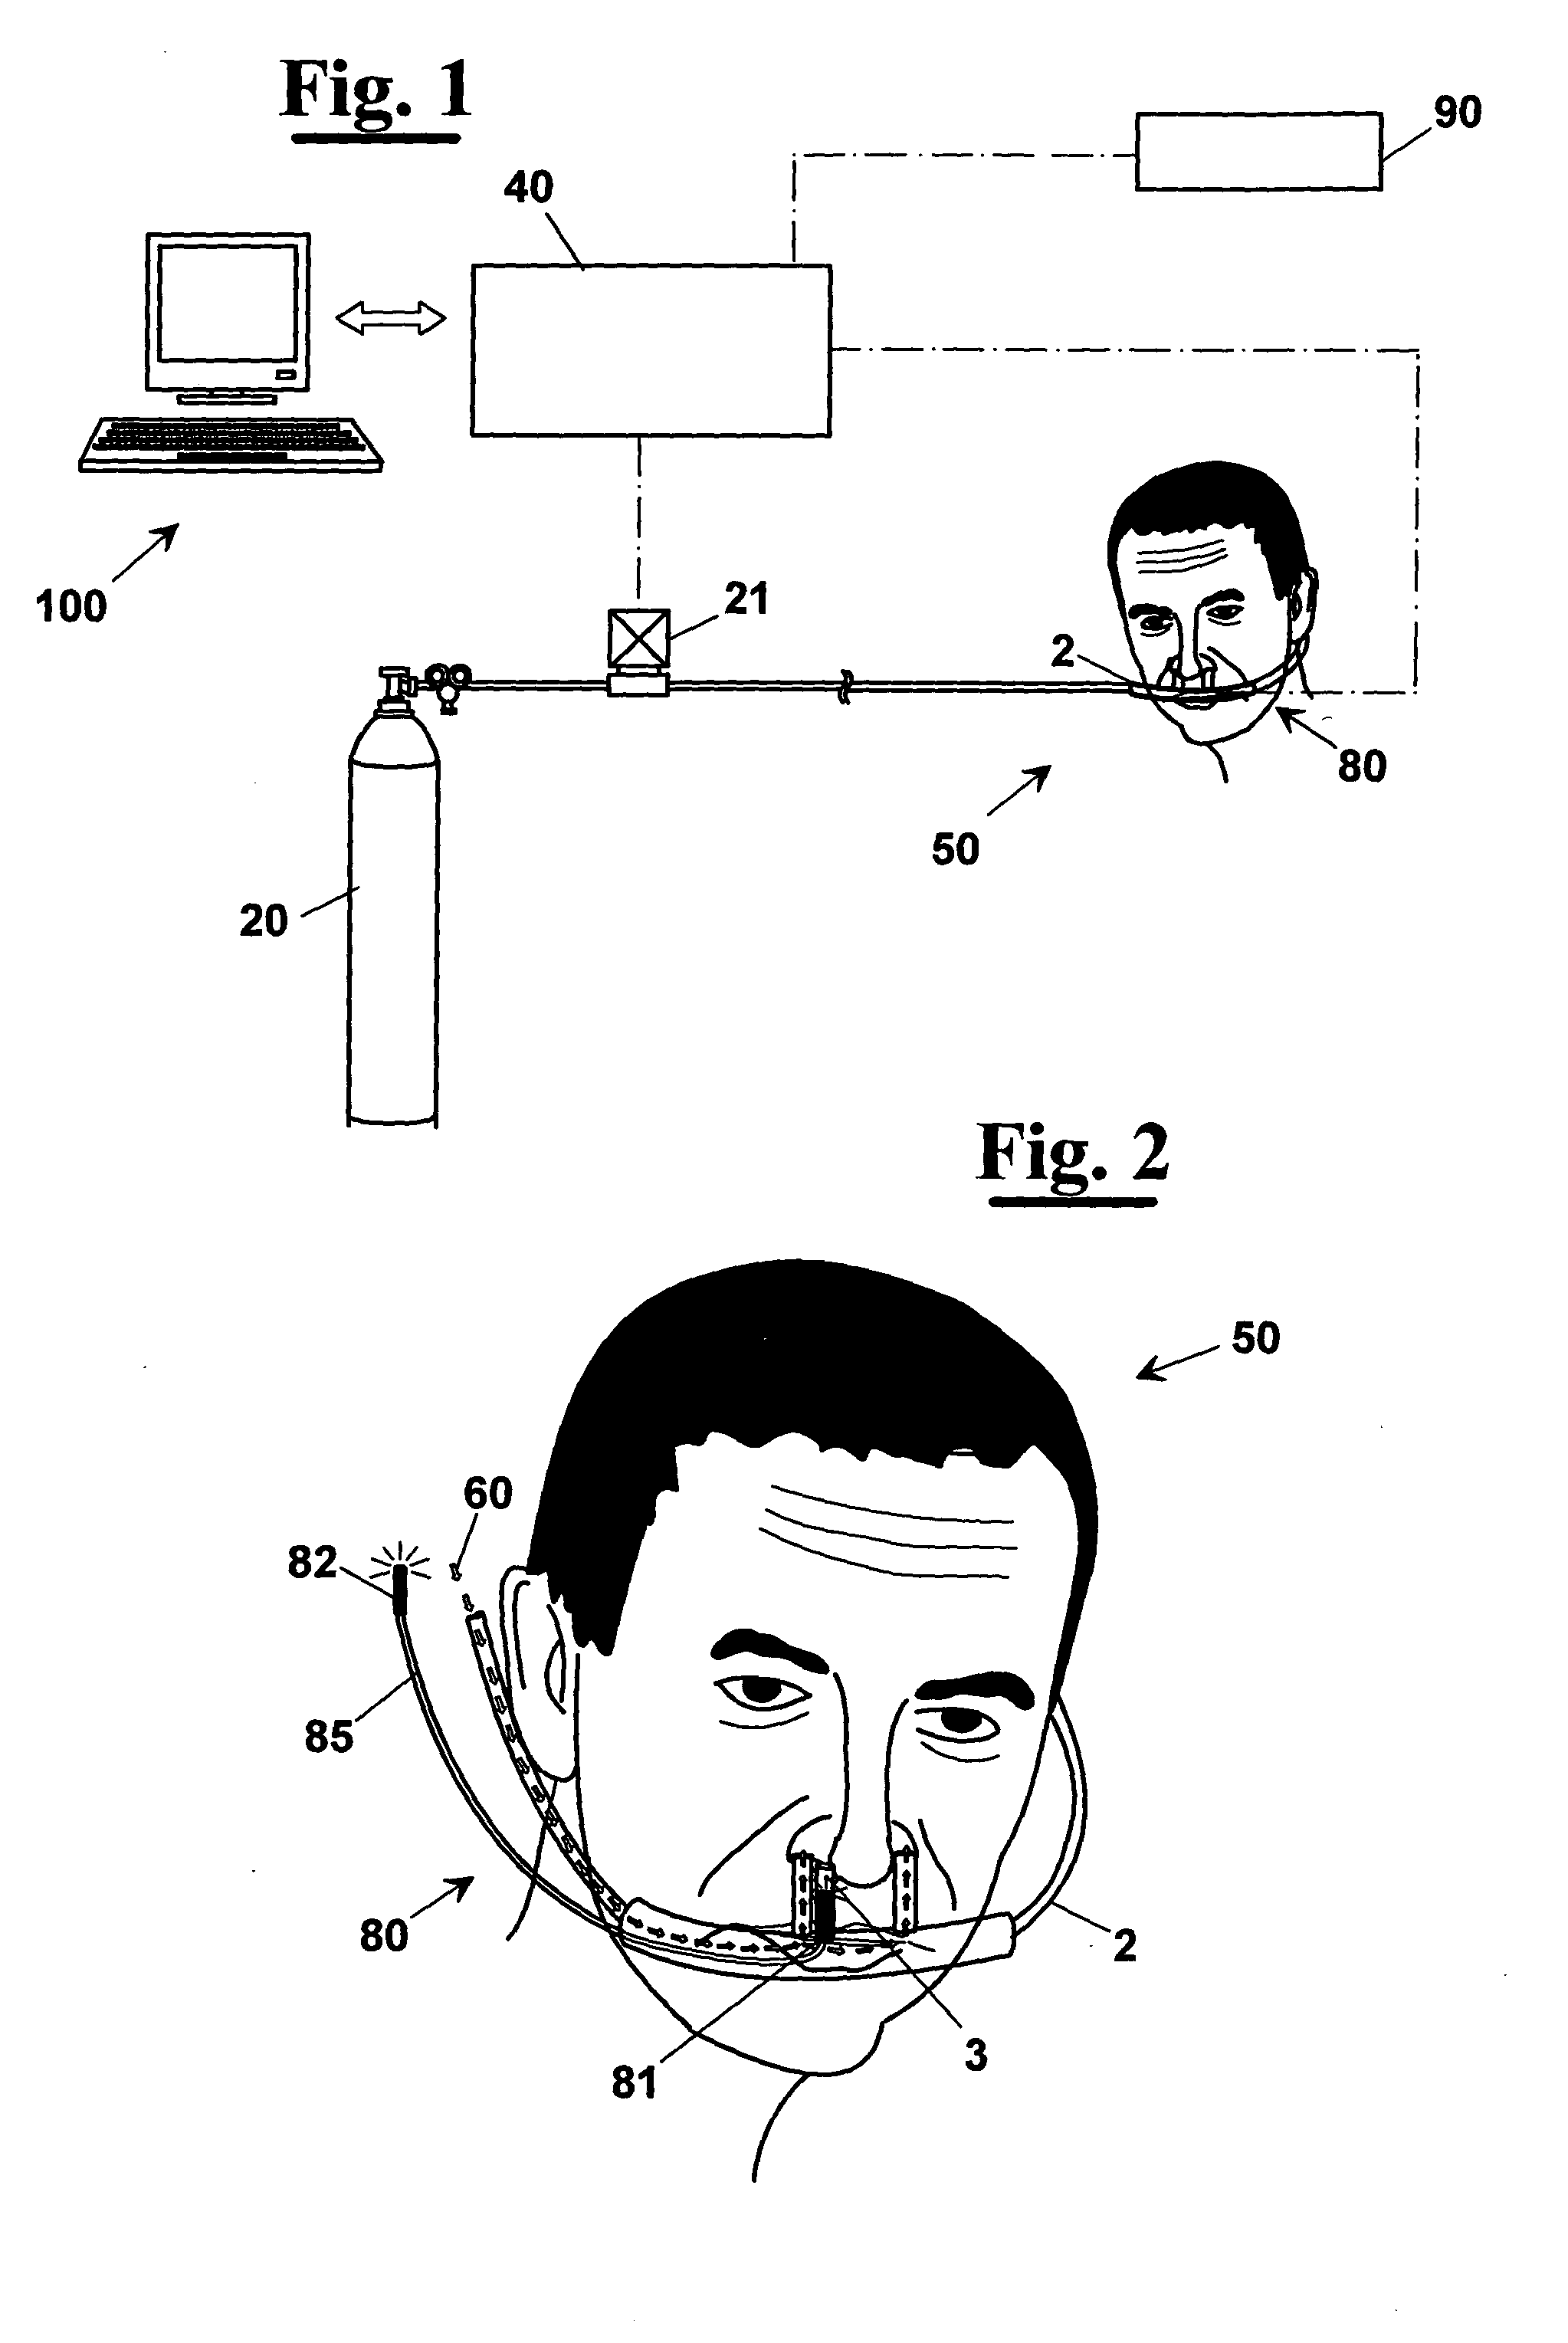 Apparatus for controlled and automatic medical gas dispensing